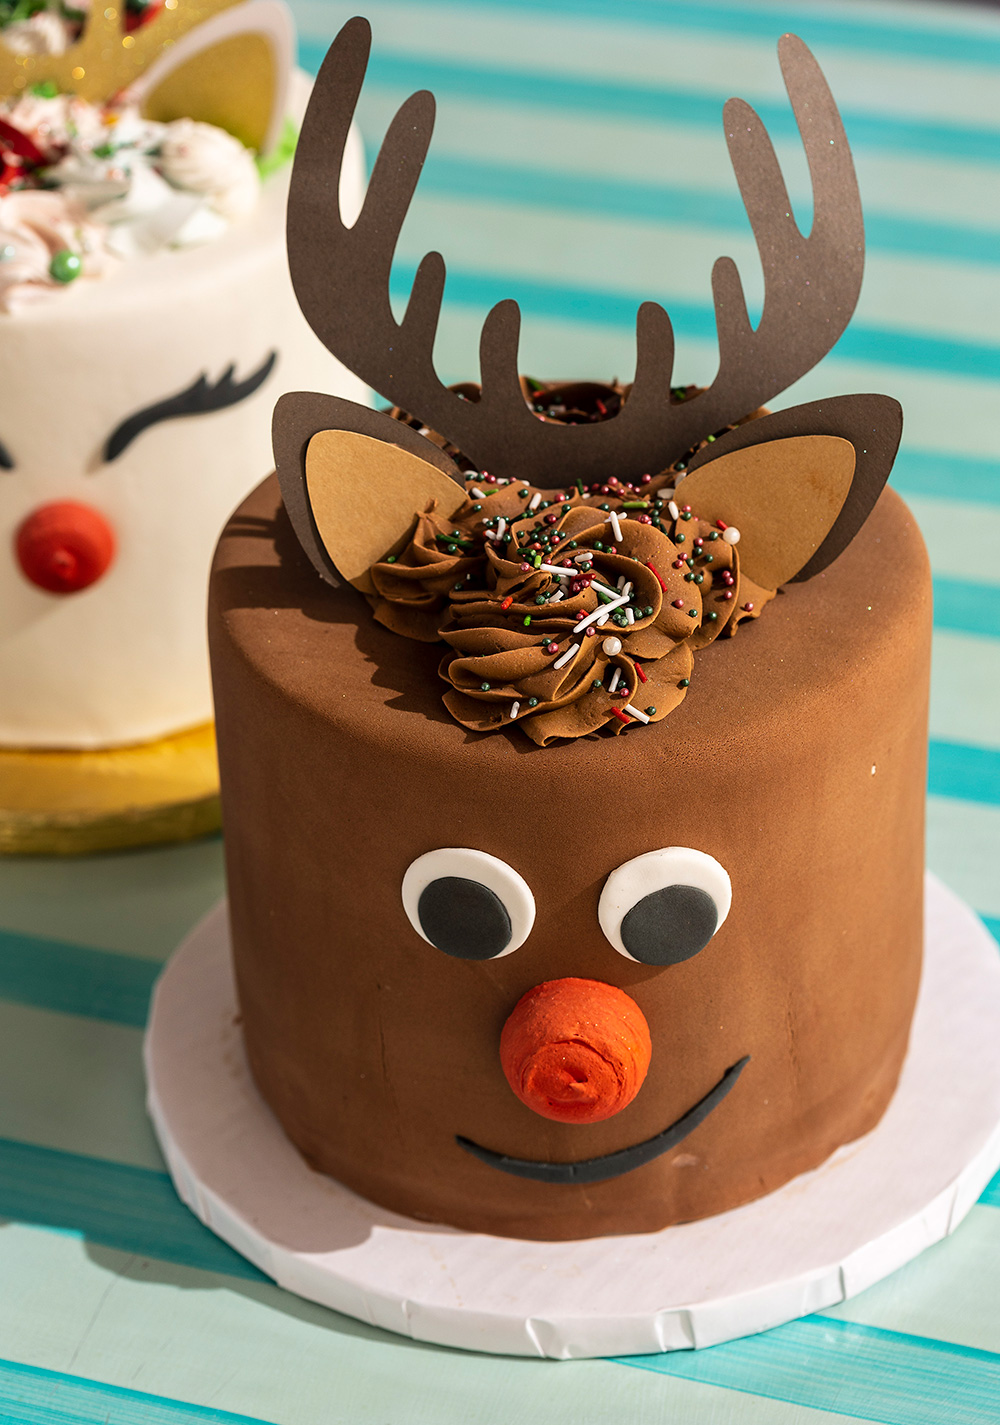 Sweet Traditions: Sweet Traditions can customize treats for the season, like this reindeer cake.